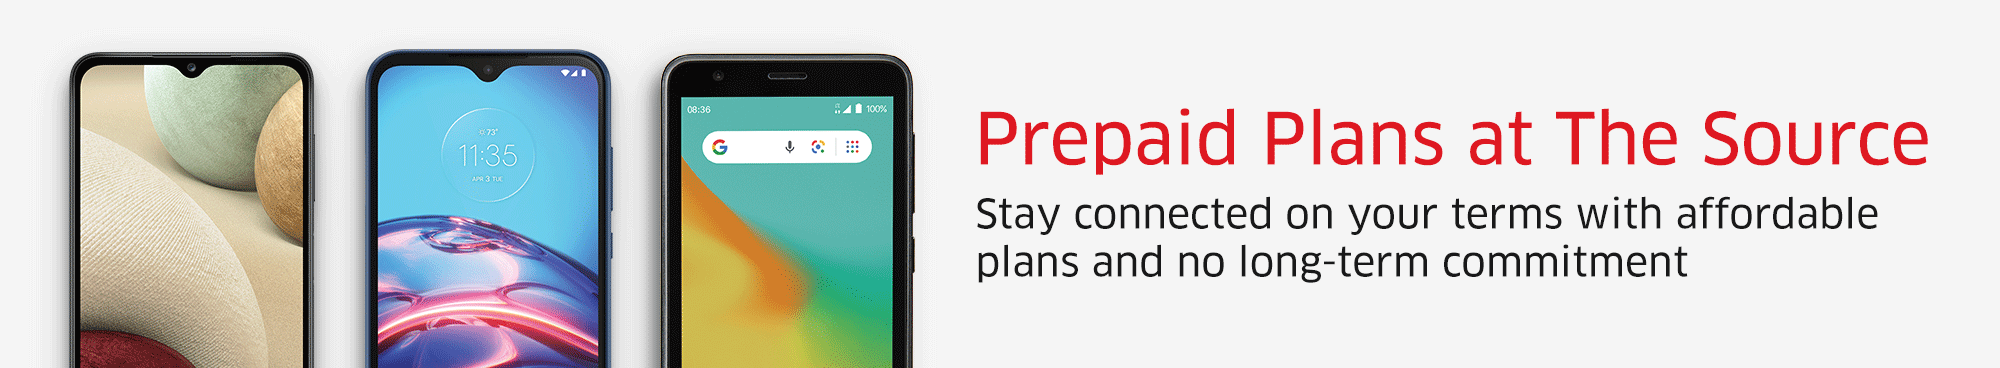 Prepaid Plans at The Source Stay connected on your terms with affordable plans and no long-term commitment